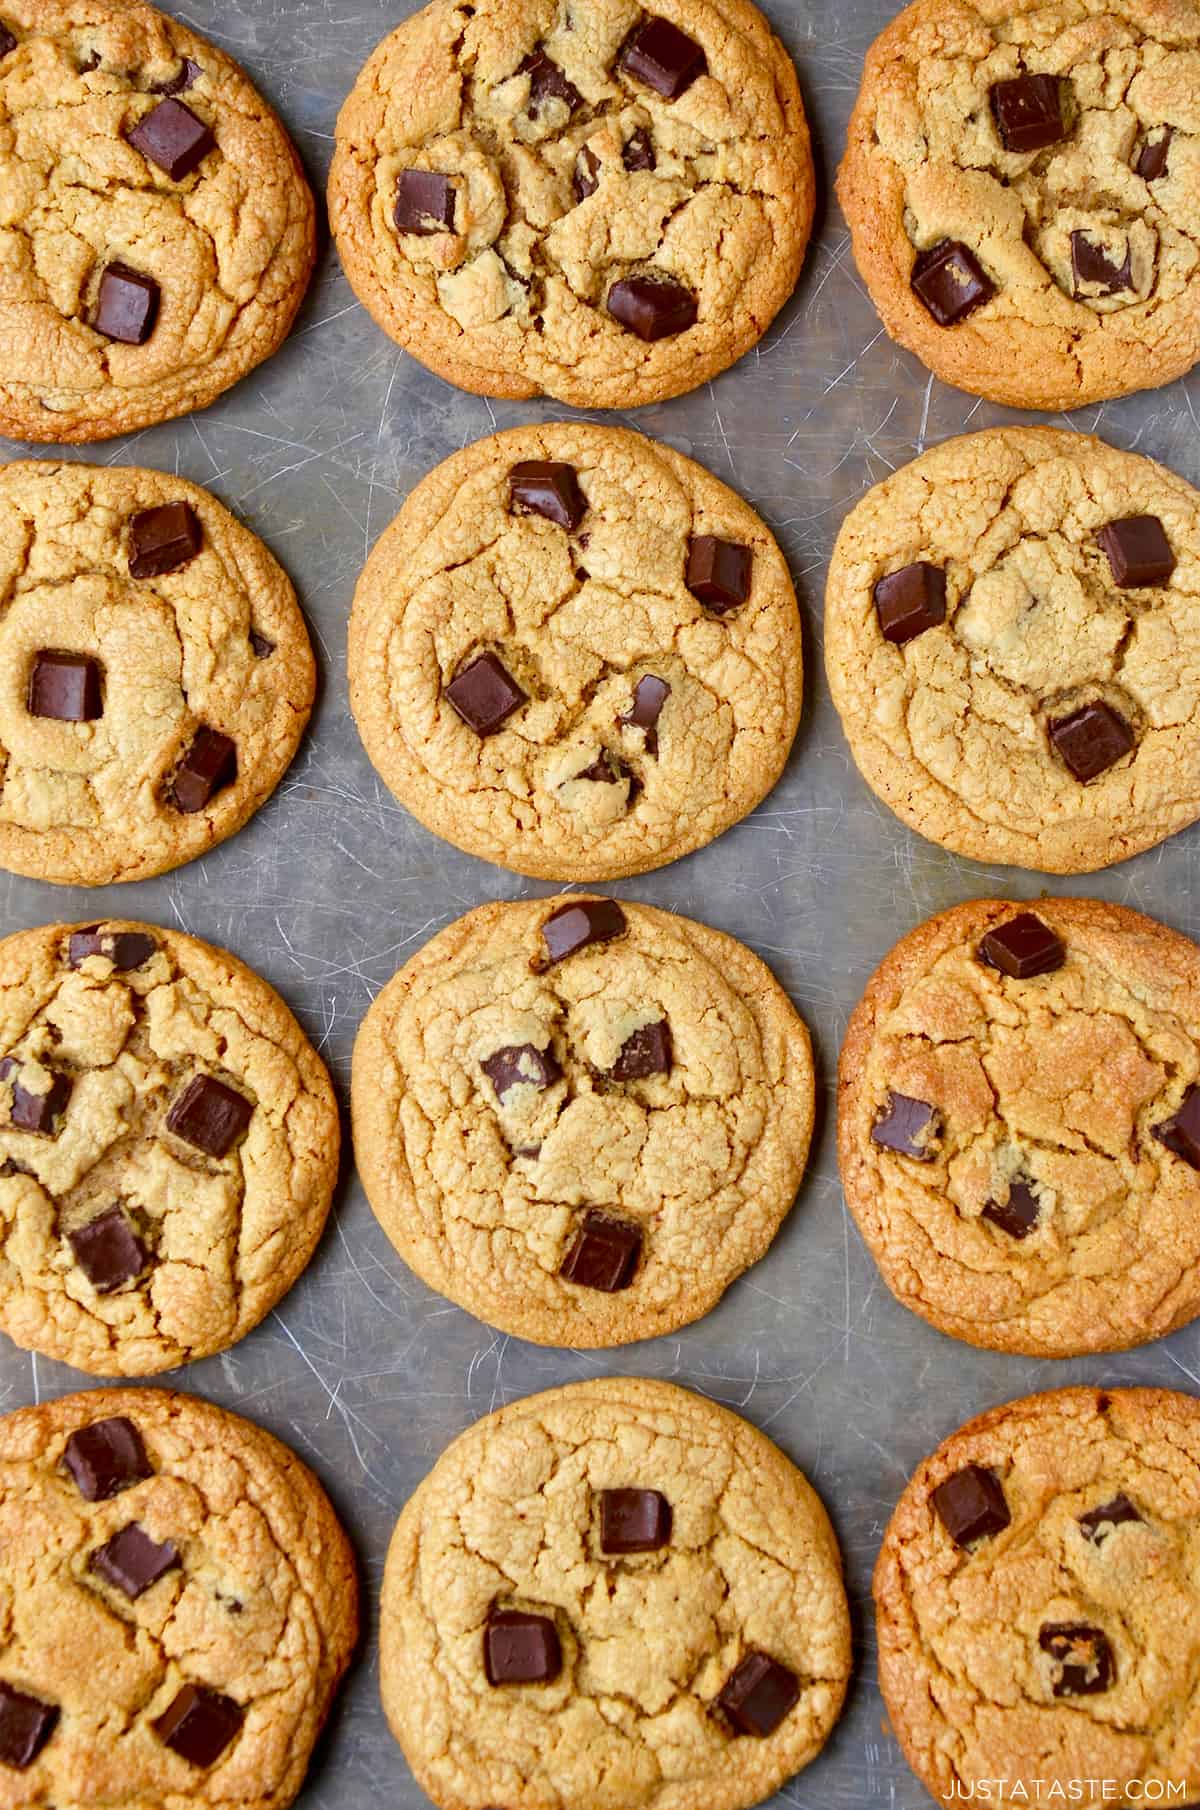 Three perfect rows of soft and chewy peanut butter chocolate chip cookies.